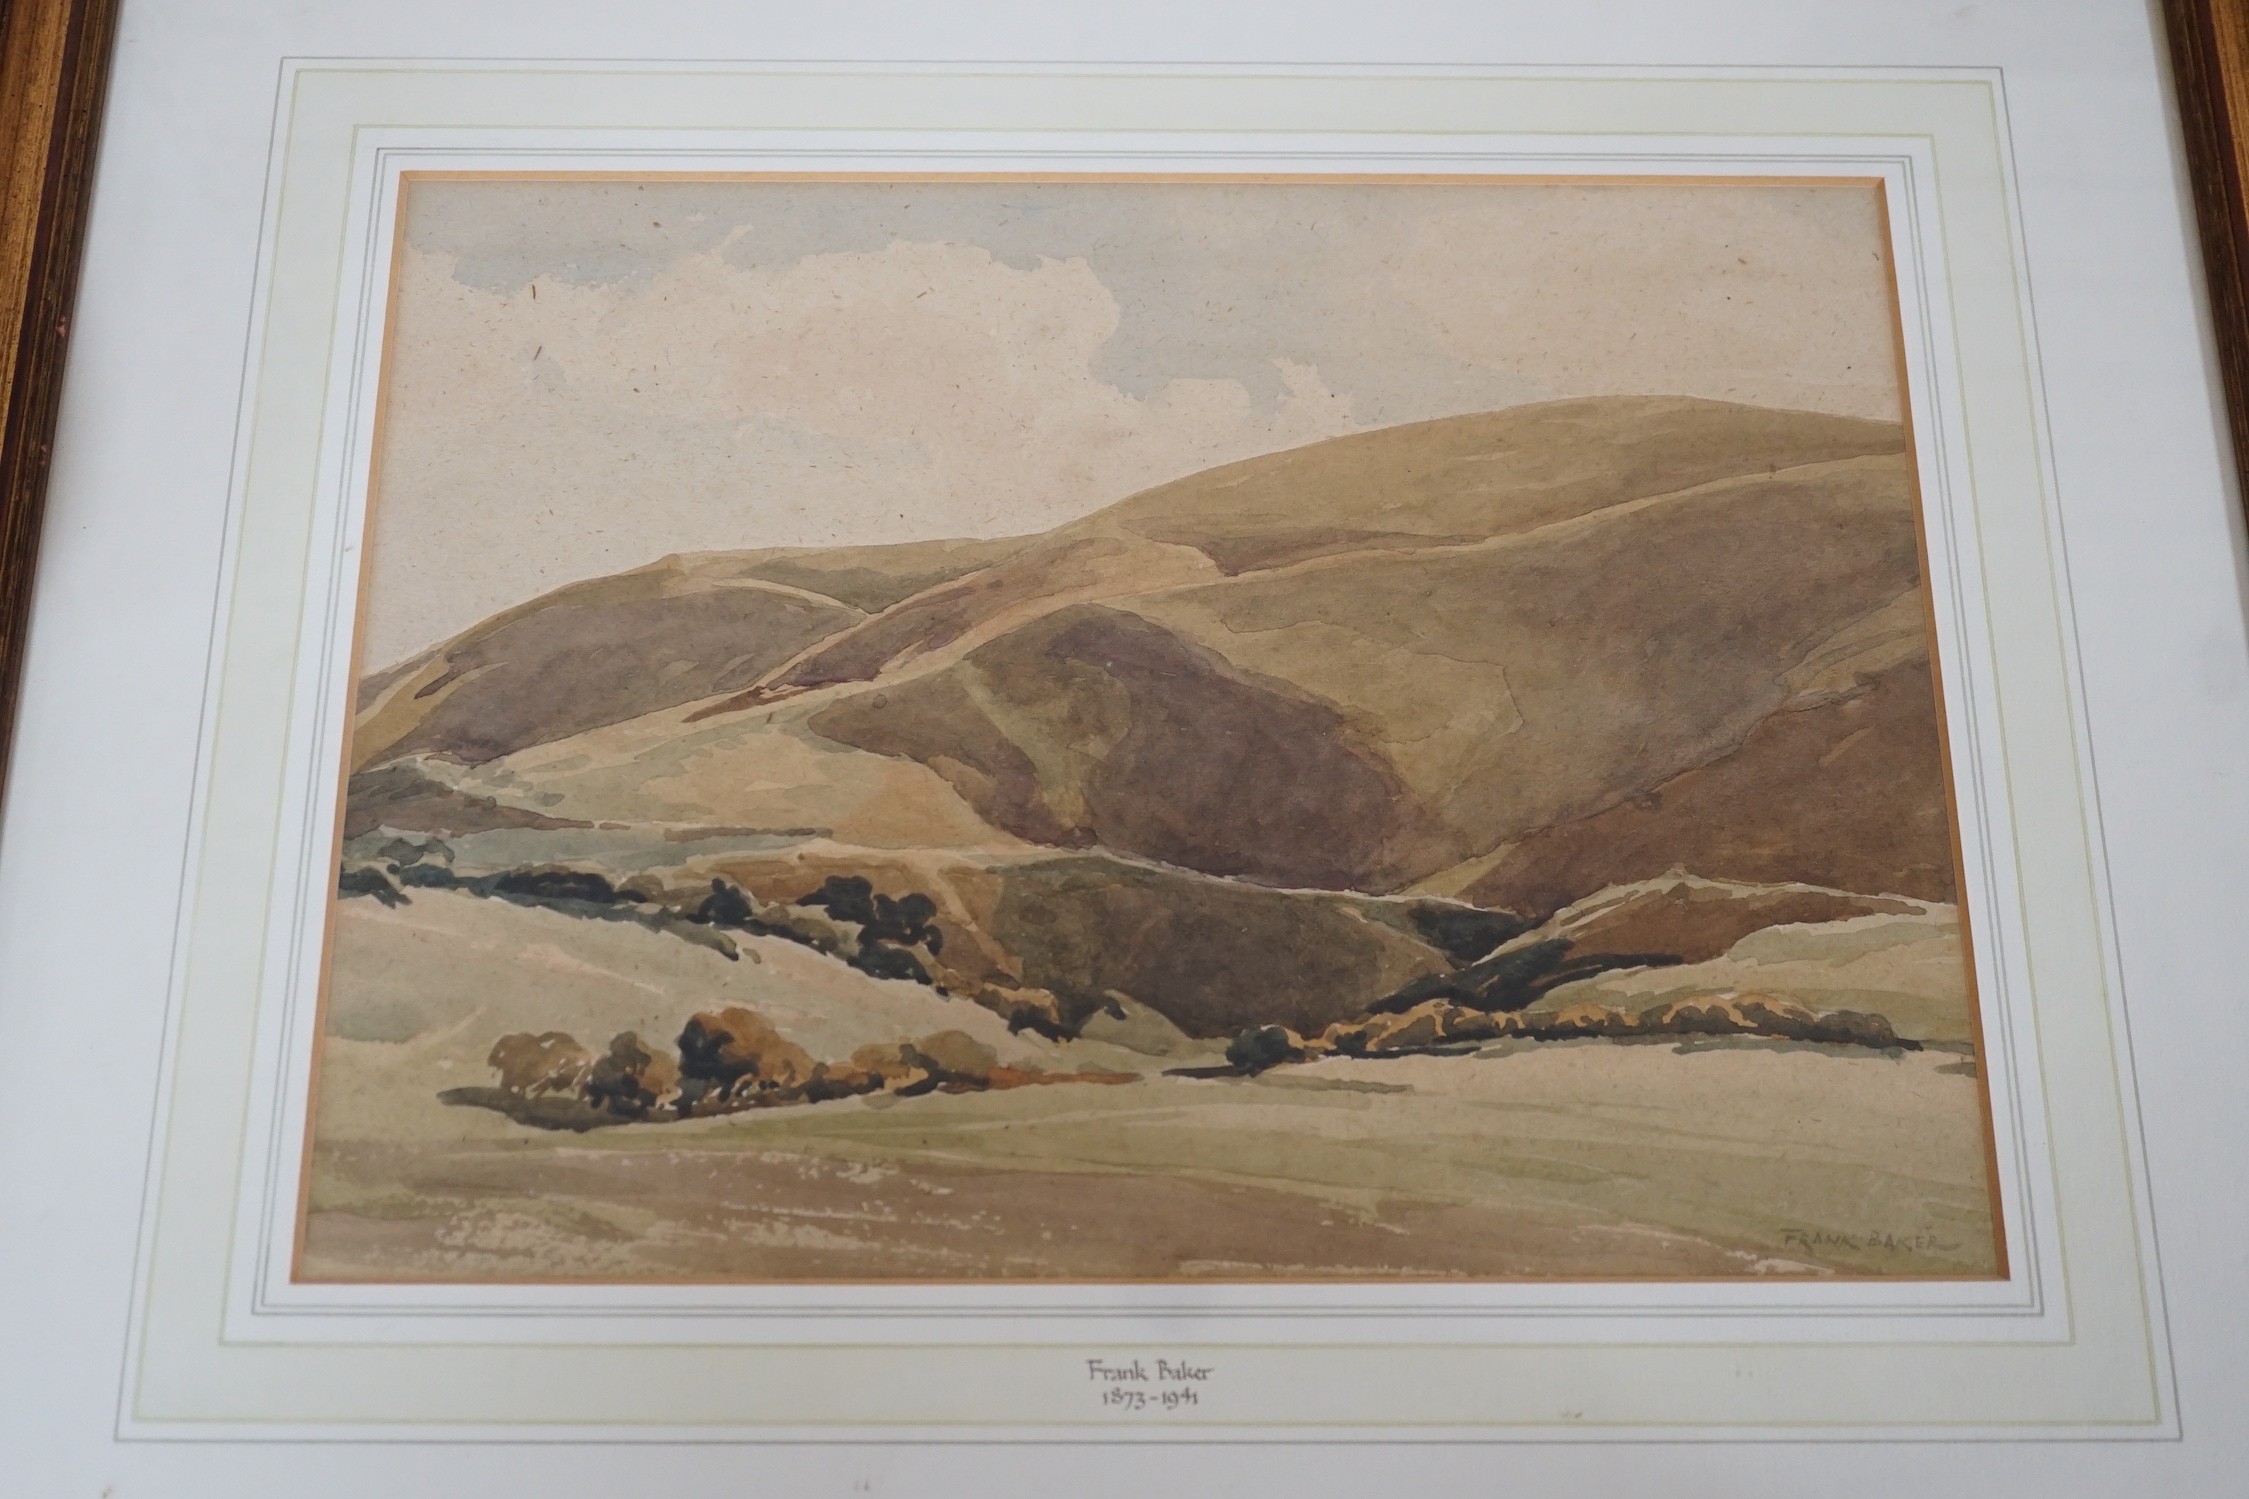 Frank Baker (1873-1941), three watercolours, Sussex landscapes, signed, largest 30 x 39.5cm - Image 3 of 4